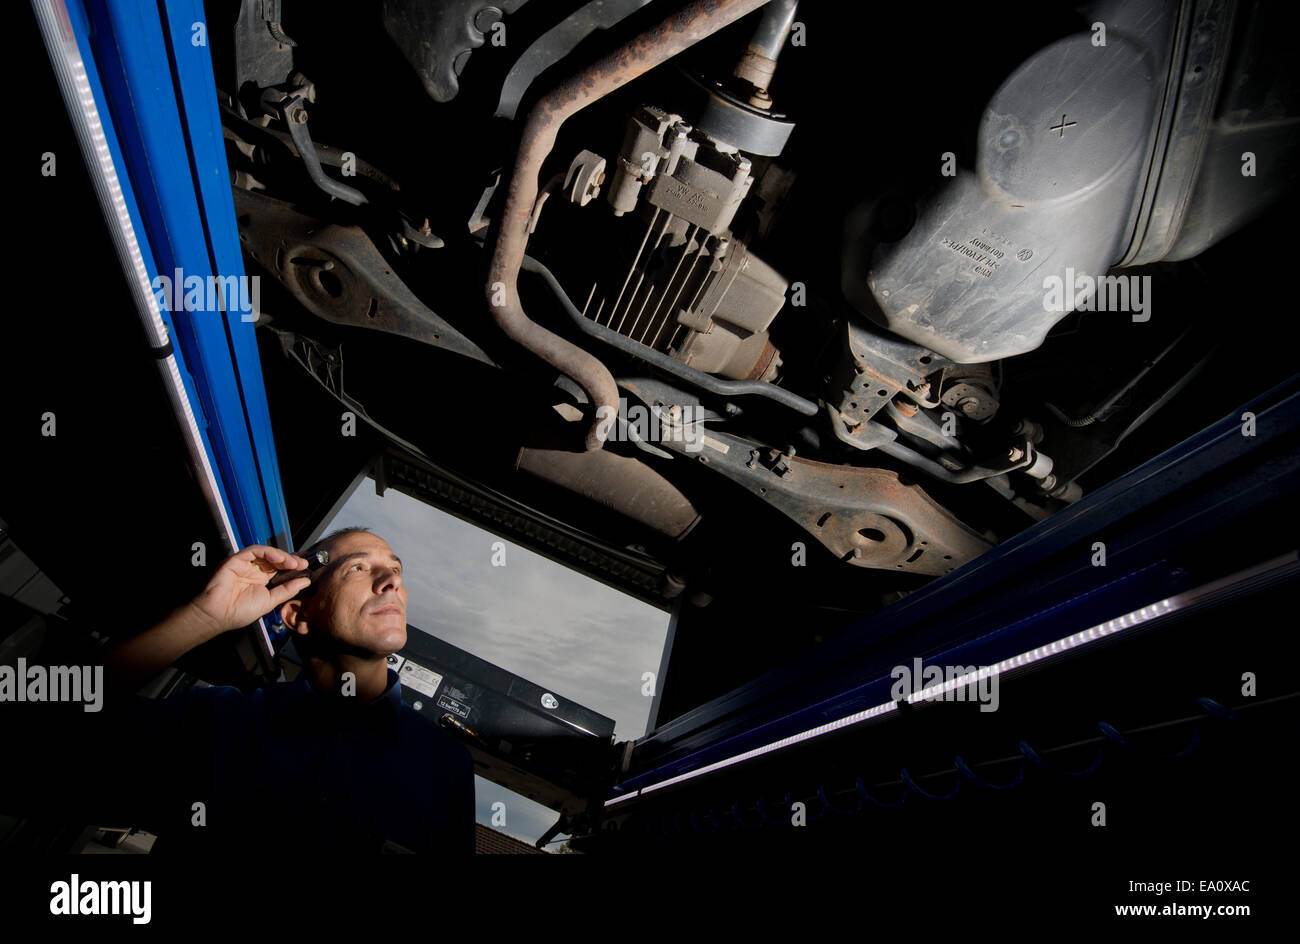 Hildesheim, Germany. 4th Nov, 2014. Technical inspector of TUV Nord, technical inspection association, Geert Dannhauer, examines a Volkswagen Tiguan car at the TUV Nord testing and service station in Hildesheim, Germany, 4 November 2014. Photo: Juian Stratenschulte/dpa/Alamy Live News Stock Photo